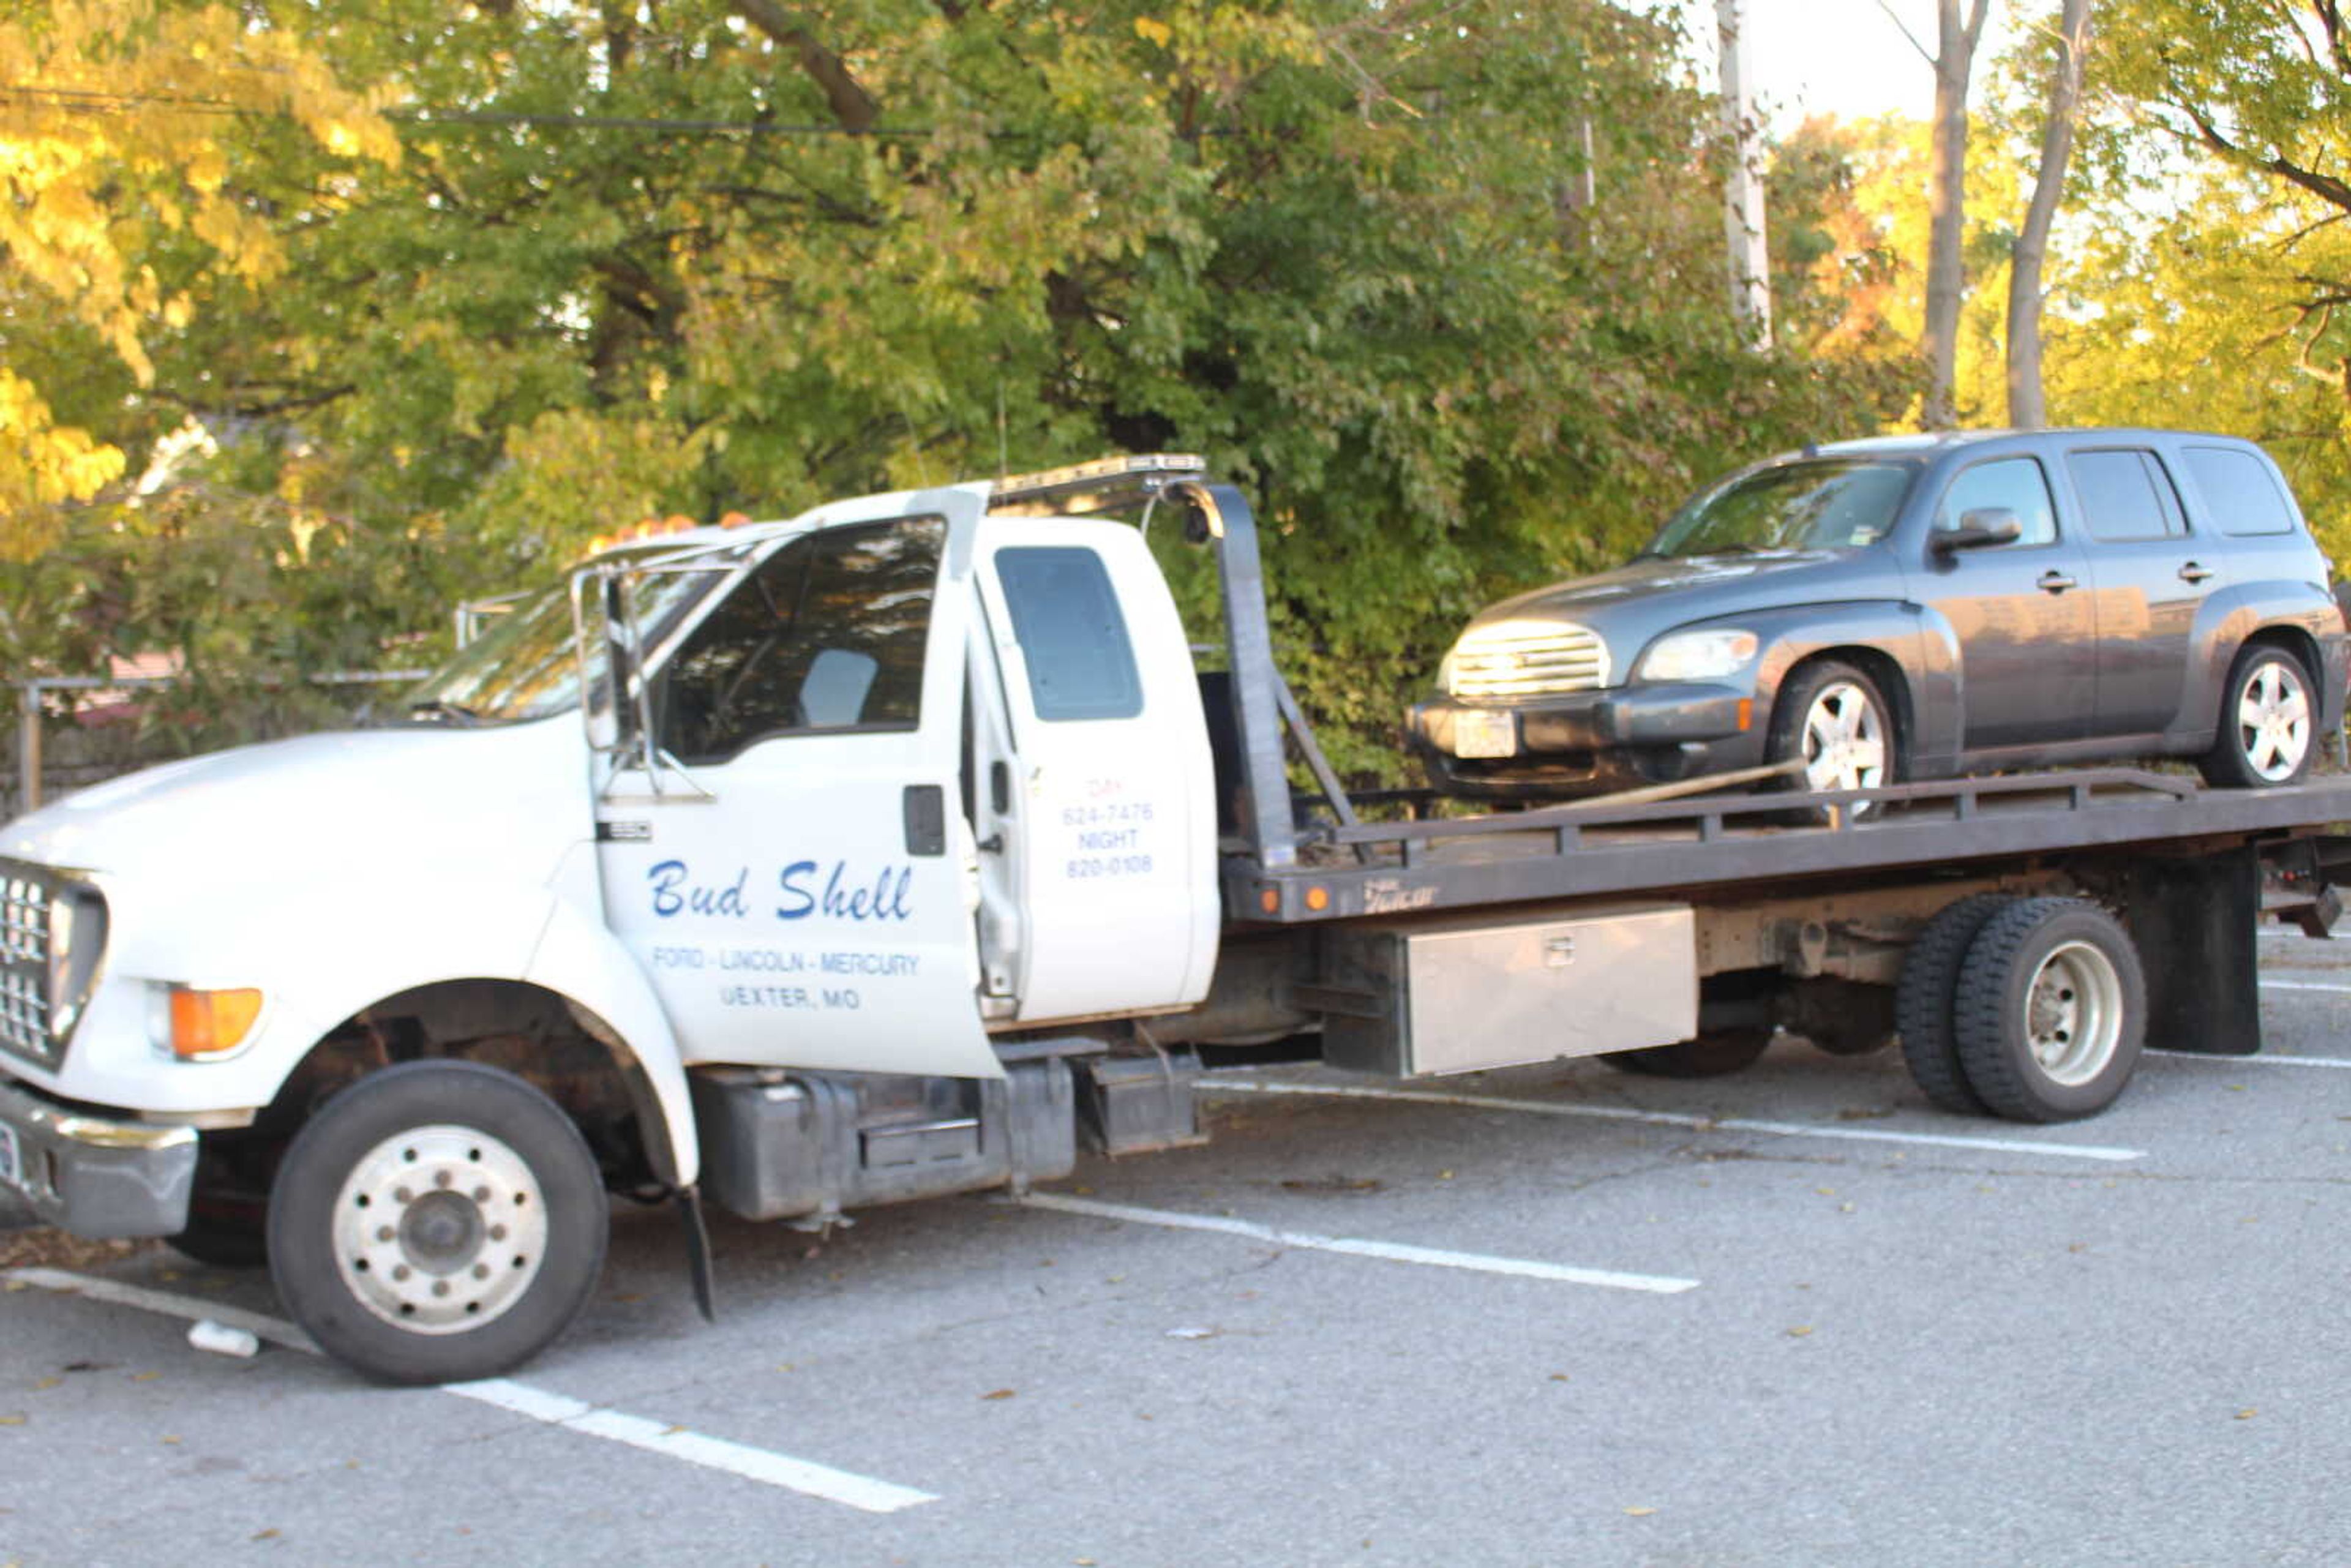 Many had to be towed to auto repair shops after vandals damaged at least 17 vehicles that were parked in preferred lot B 1-21 across from Vandiver Hall throughout the weekend Oct. 26 and 27.